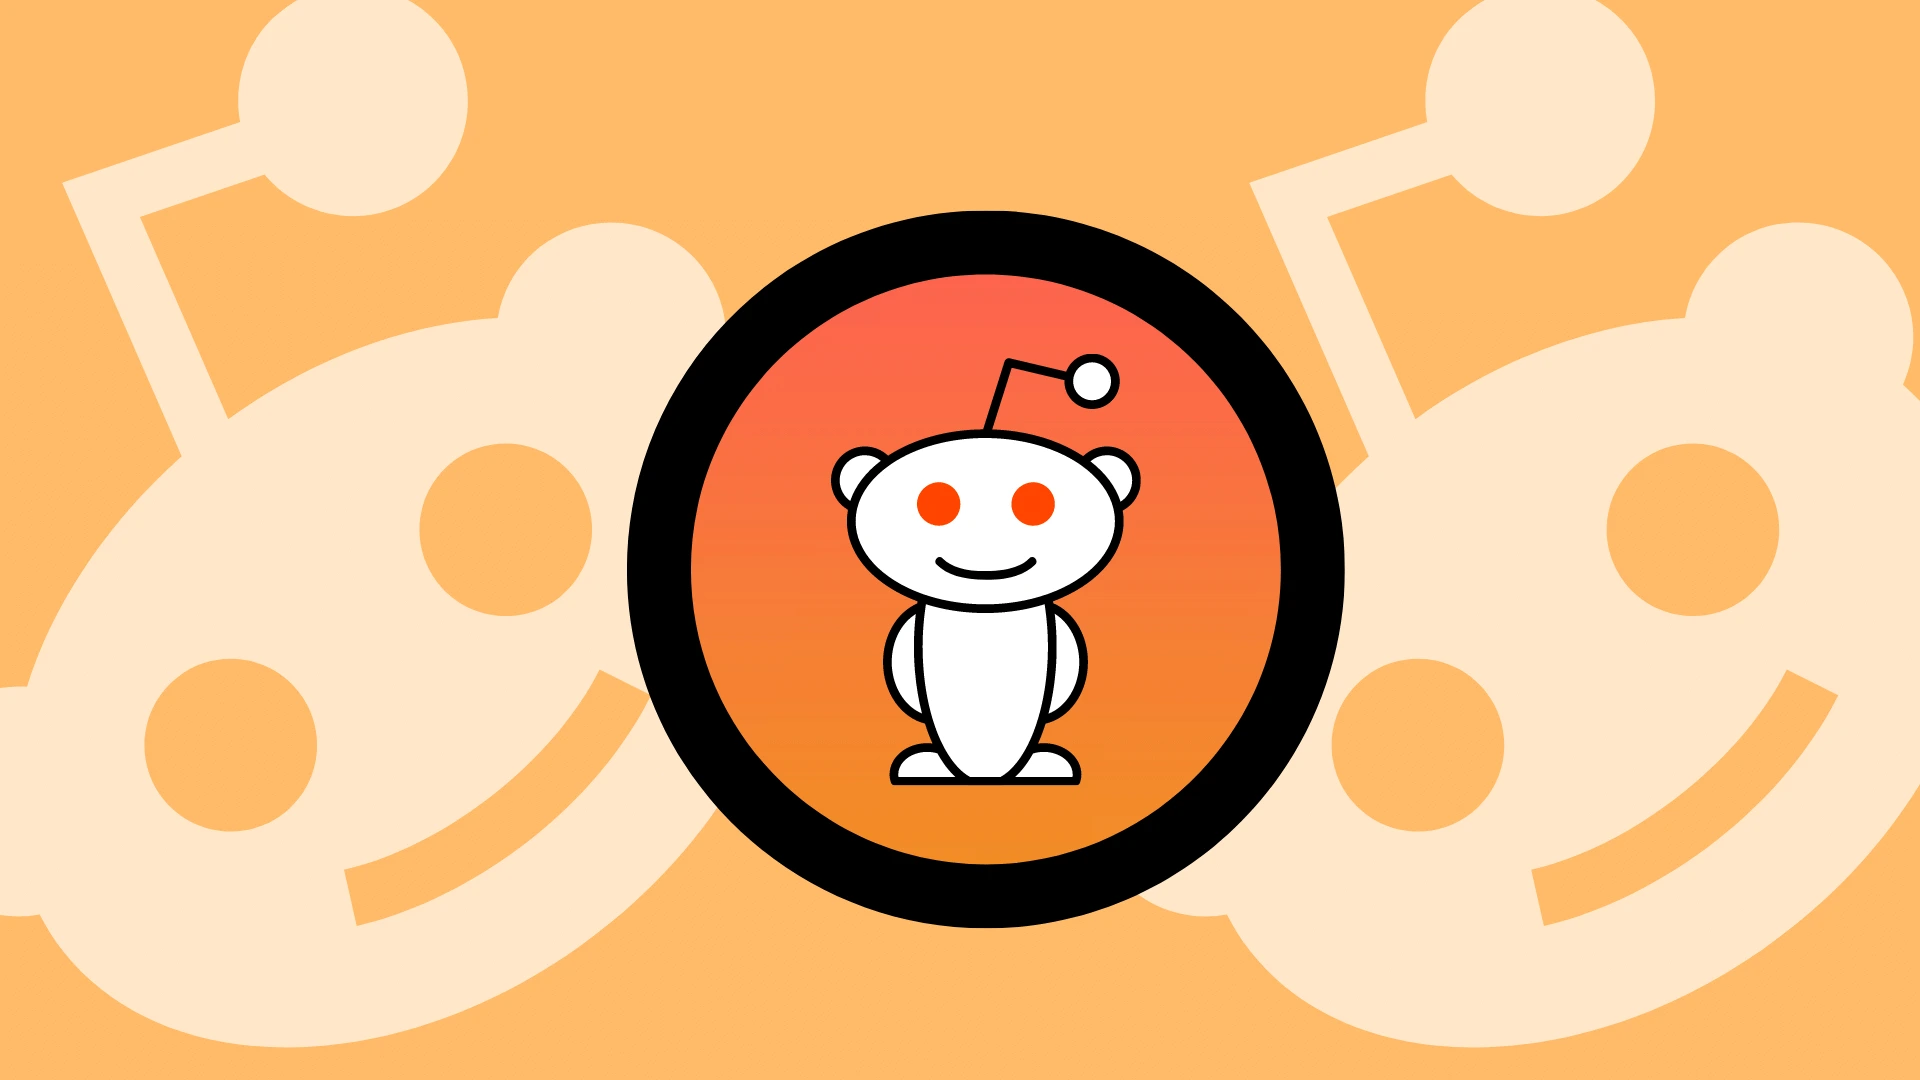 how to log out of reddit app